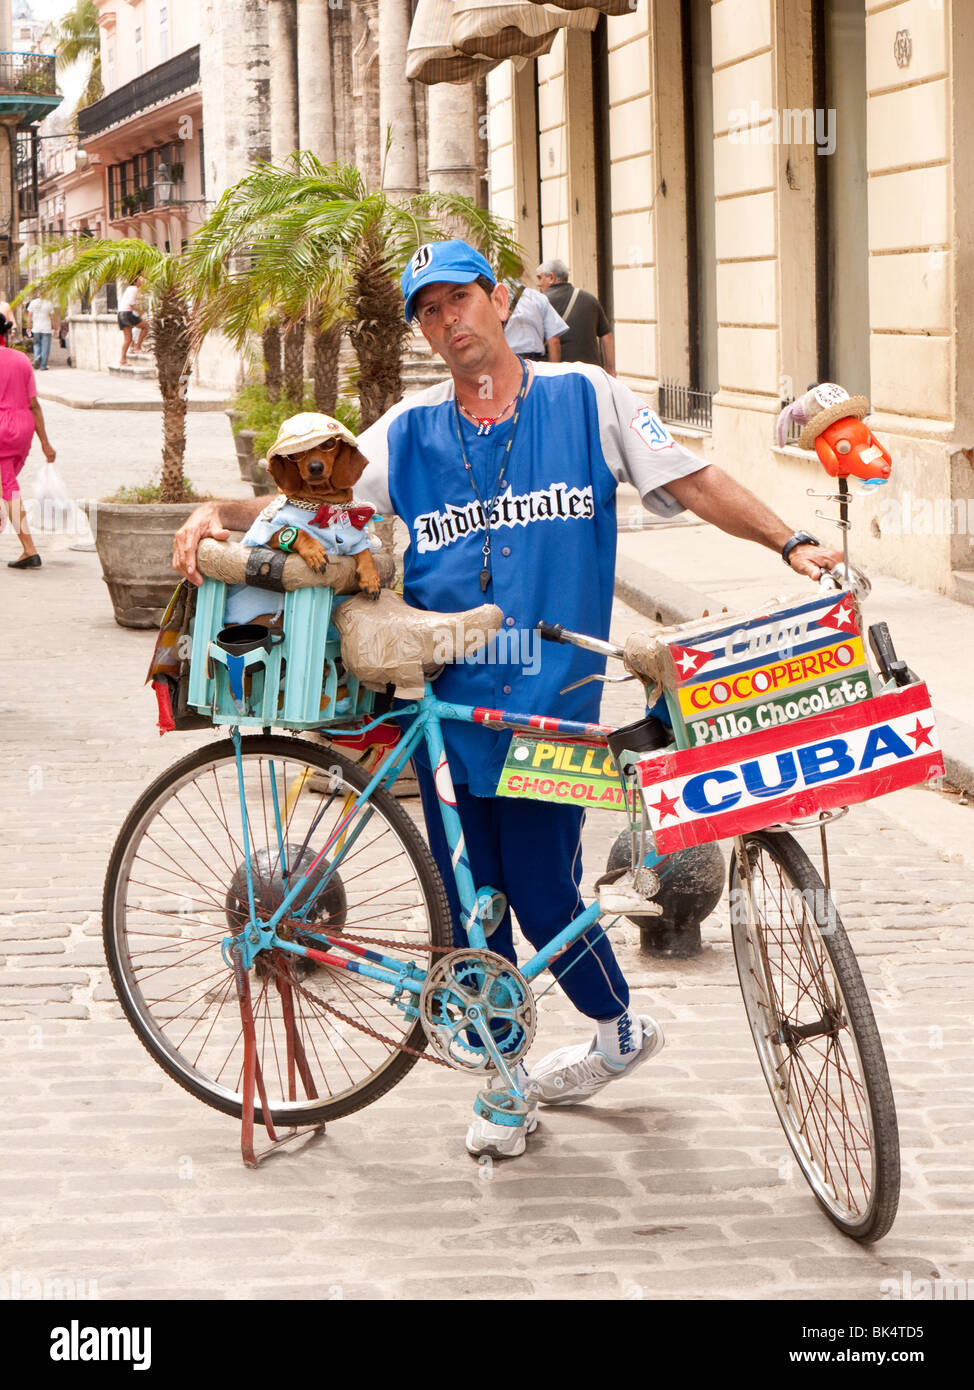 Bicycle Street seller with dog selling chocolate in Old Havana, Cuba Stock Photo